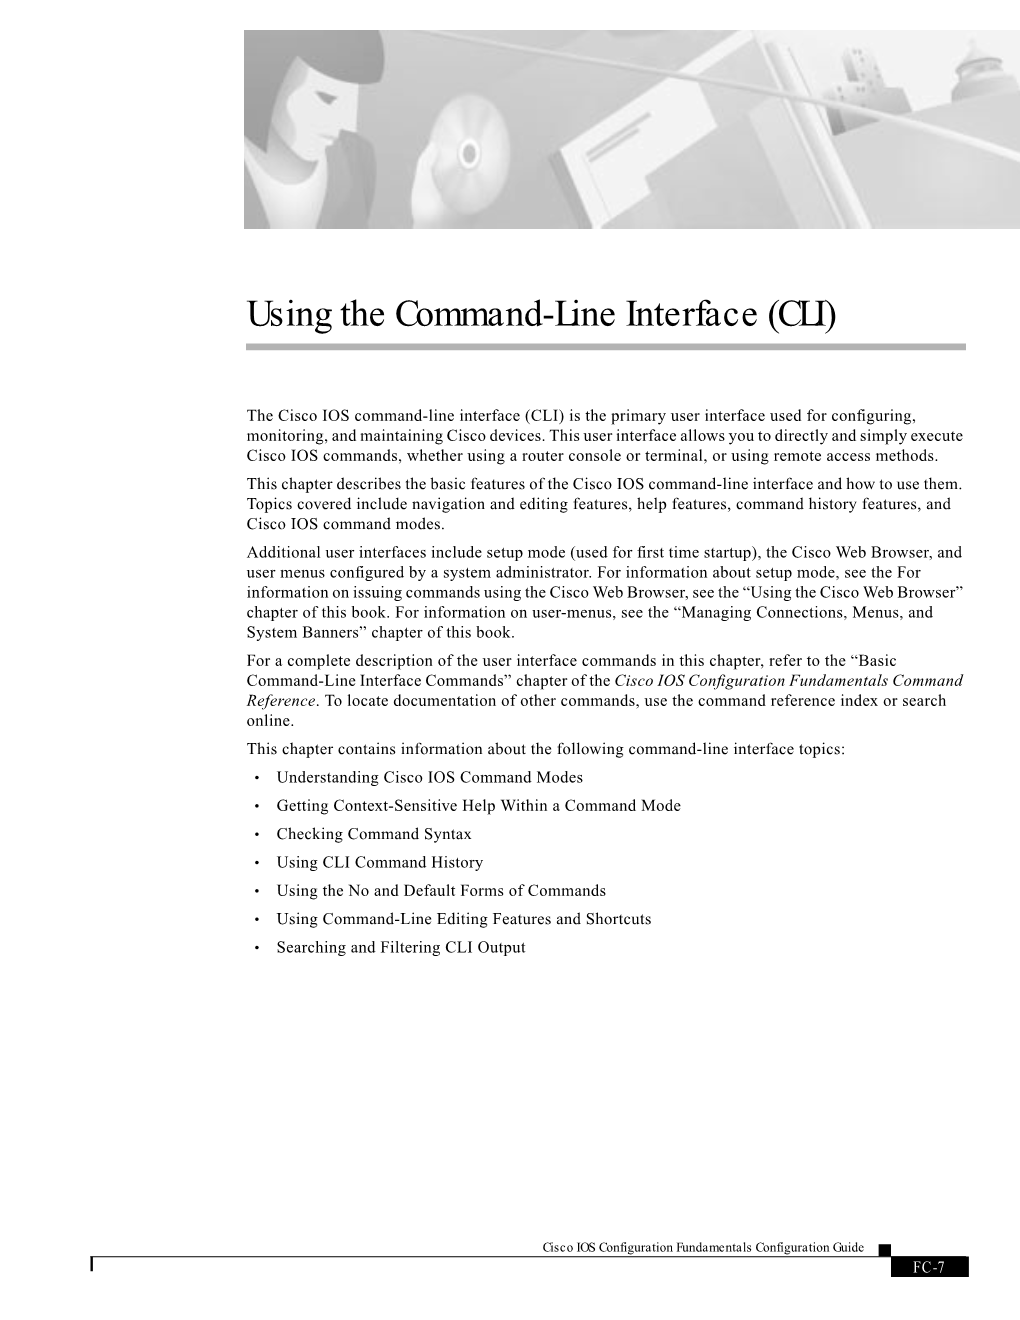 Using the Command-Line Interface (CLI)